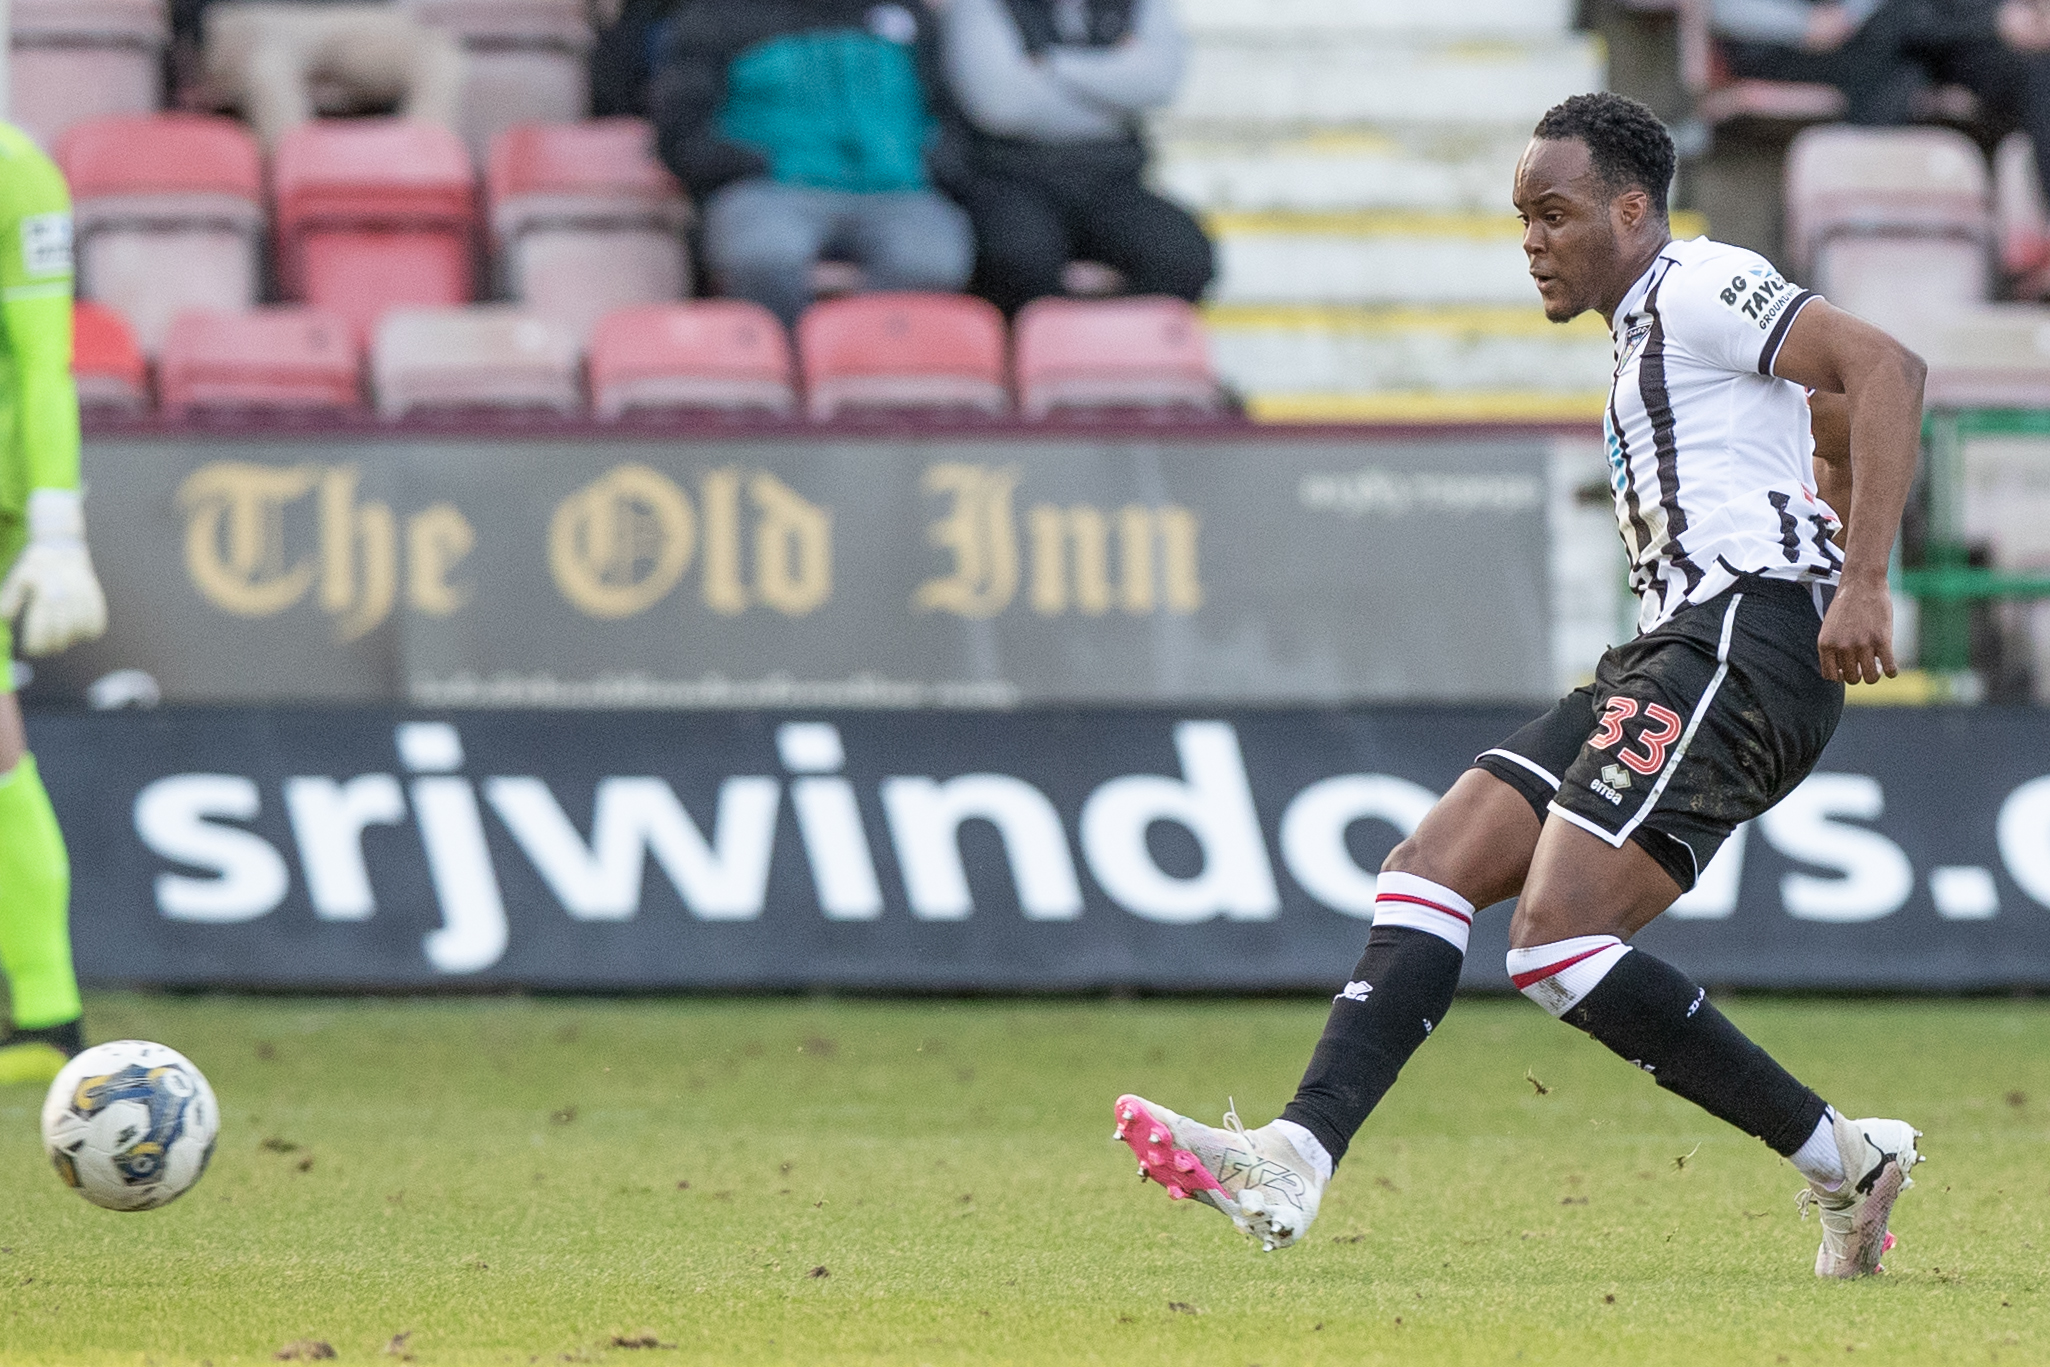 Dunfermline: Xavier Benjamin on Cardiff loan move and Fulham grounding